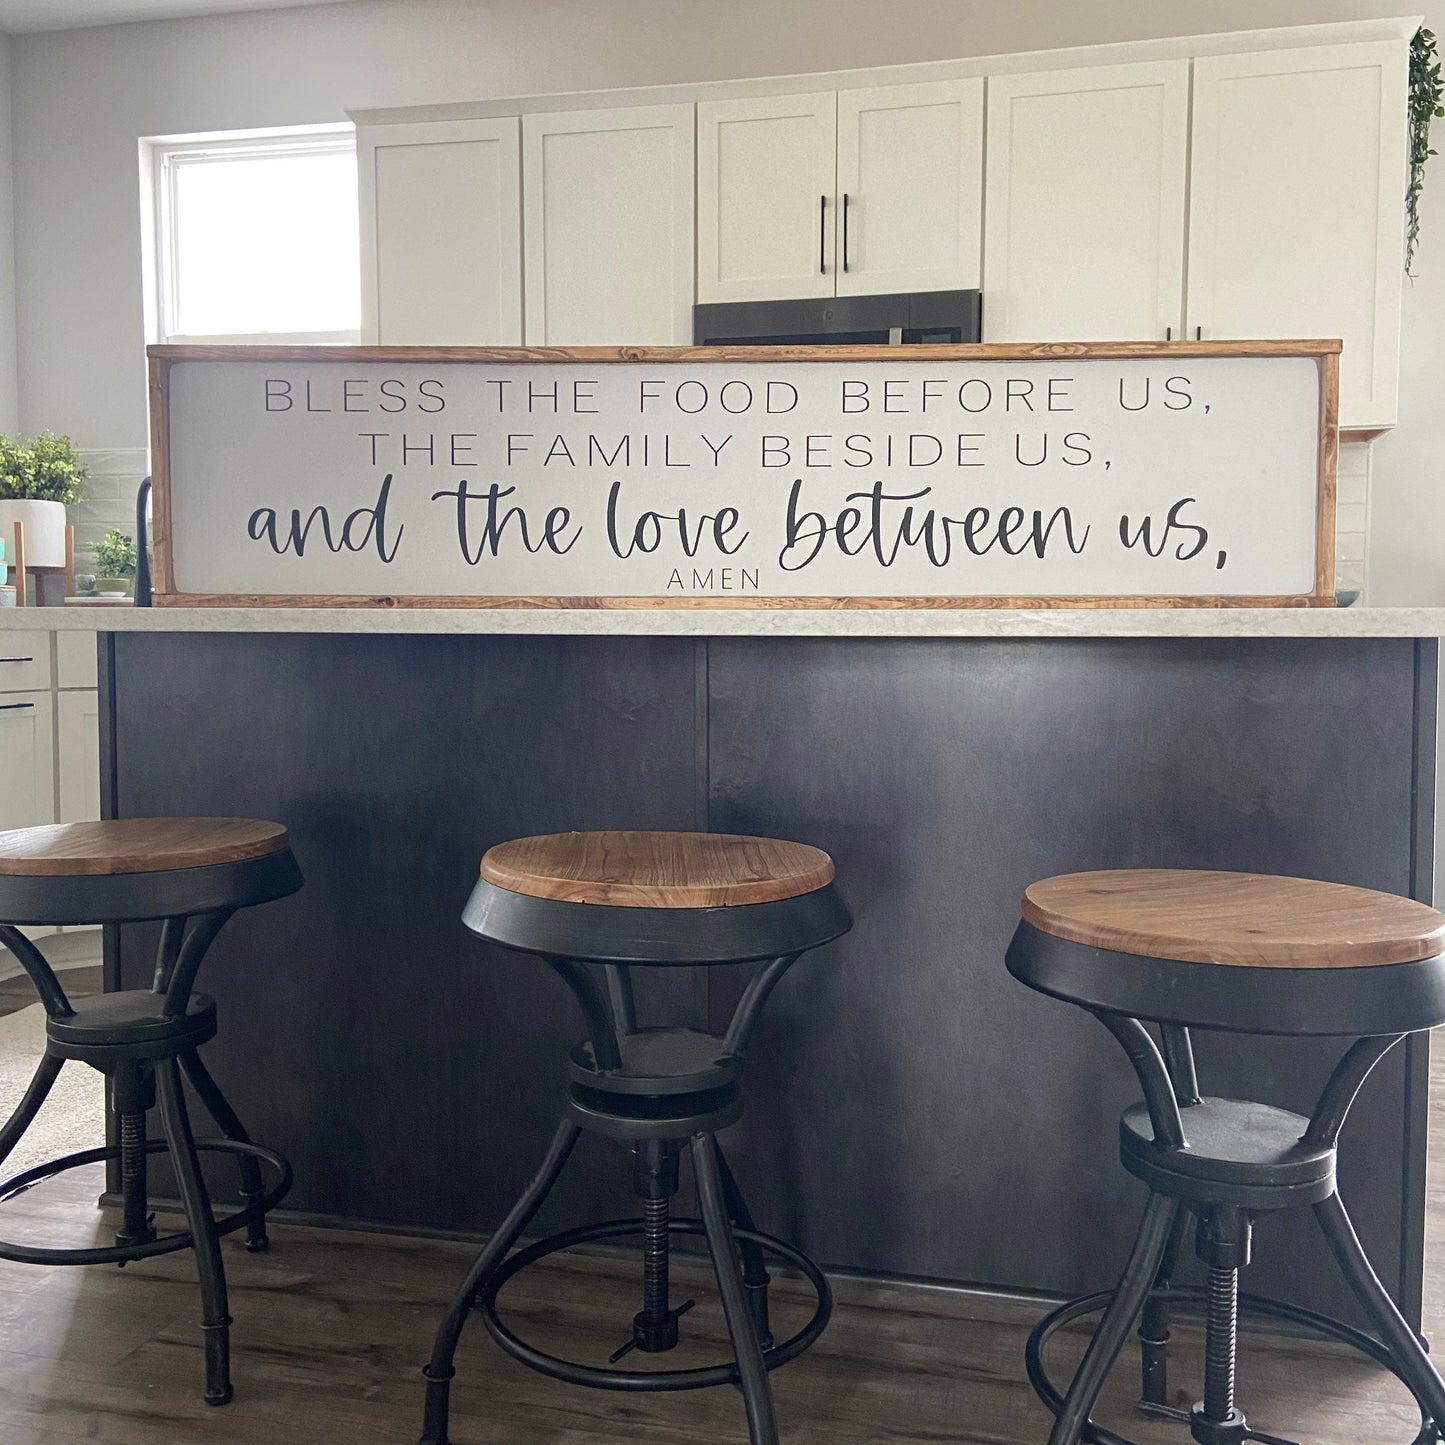 the love between us. oversized kitchen sign [FREE SHIPPING!]